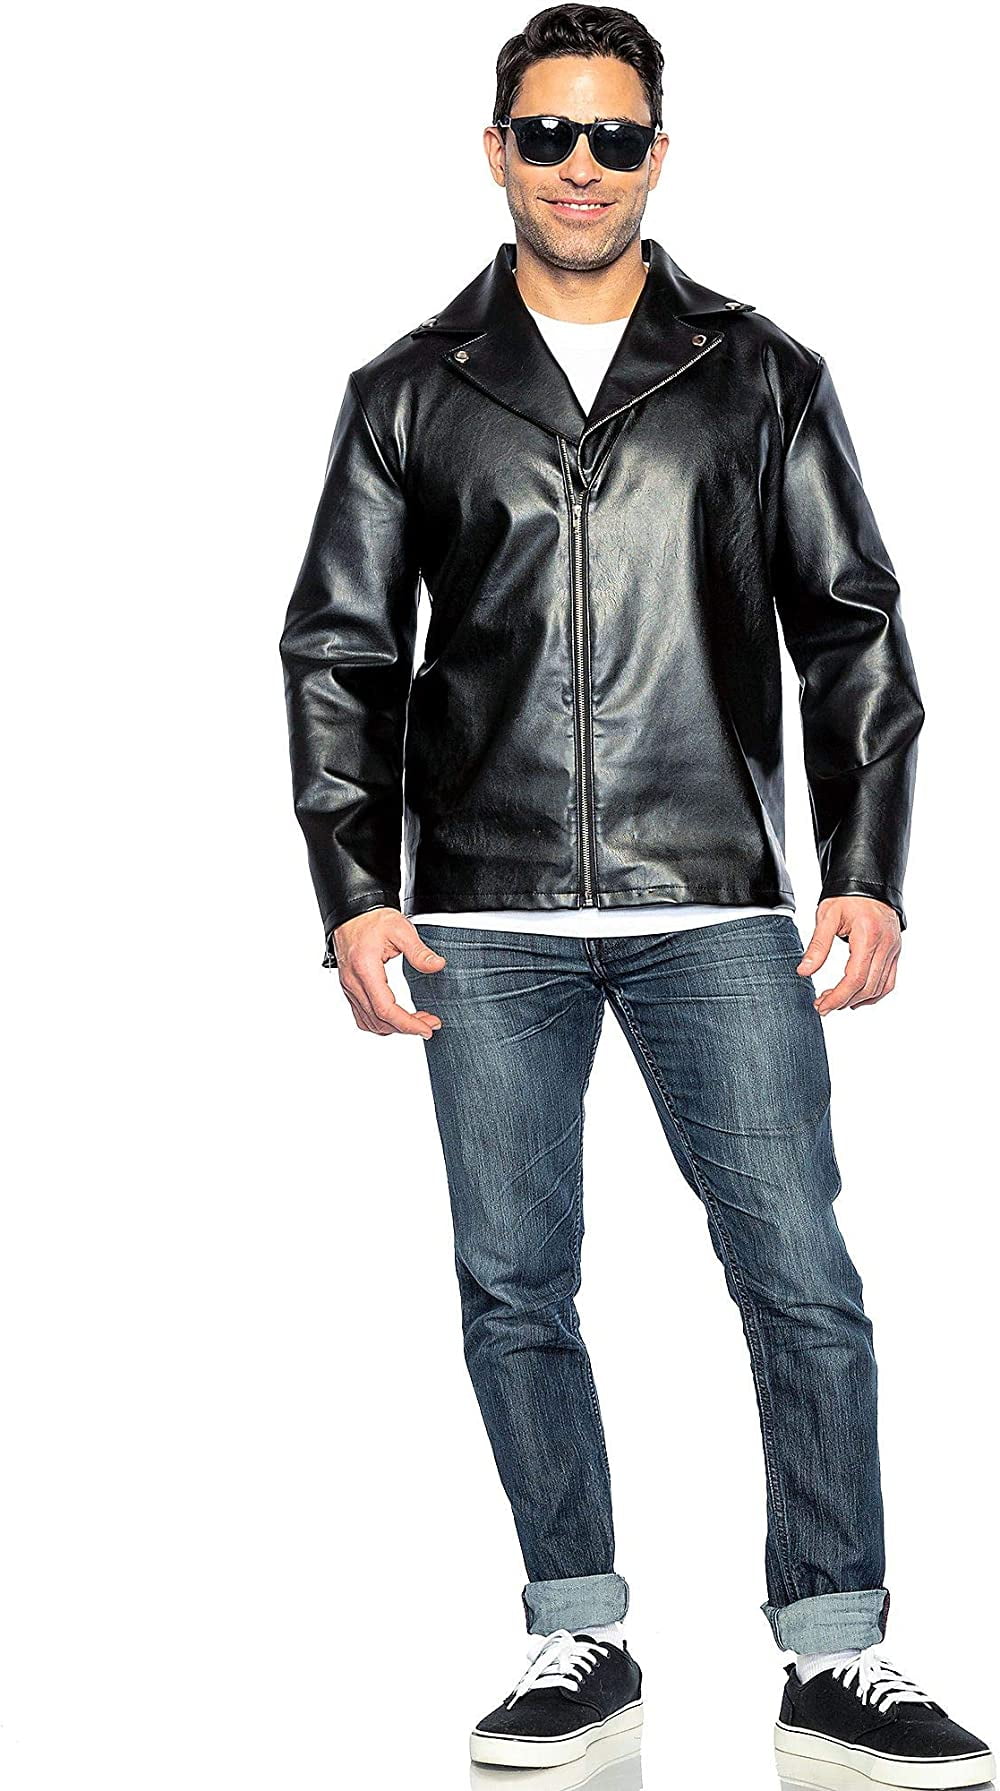 Seeing Red 50s Greaser Costume for Adults, Mens Size 42-48, Includes a  Black Faux Leather Biker Jacket and Black Sunglasses 